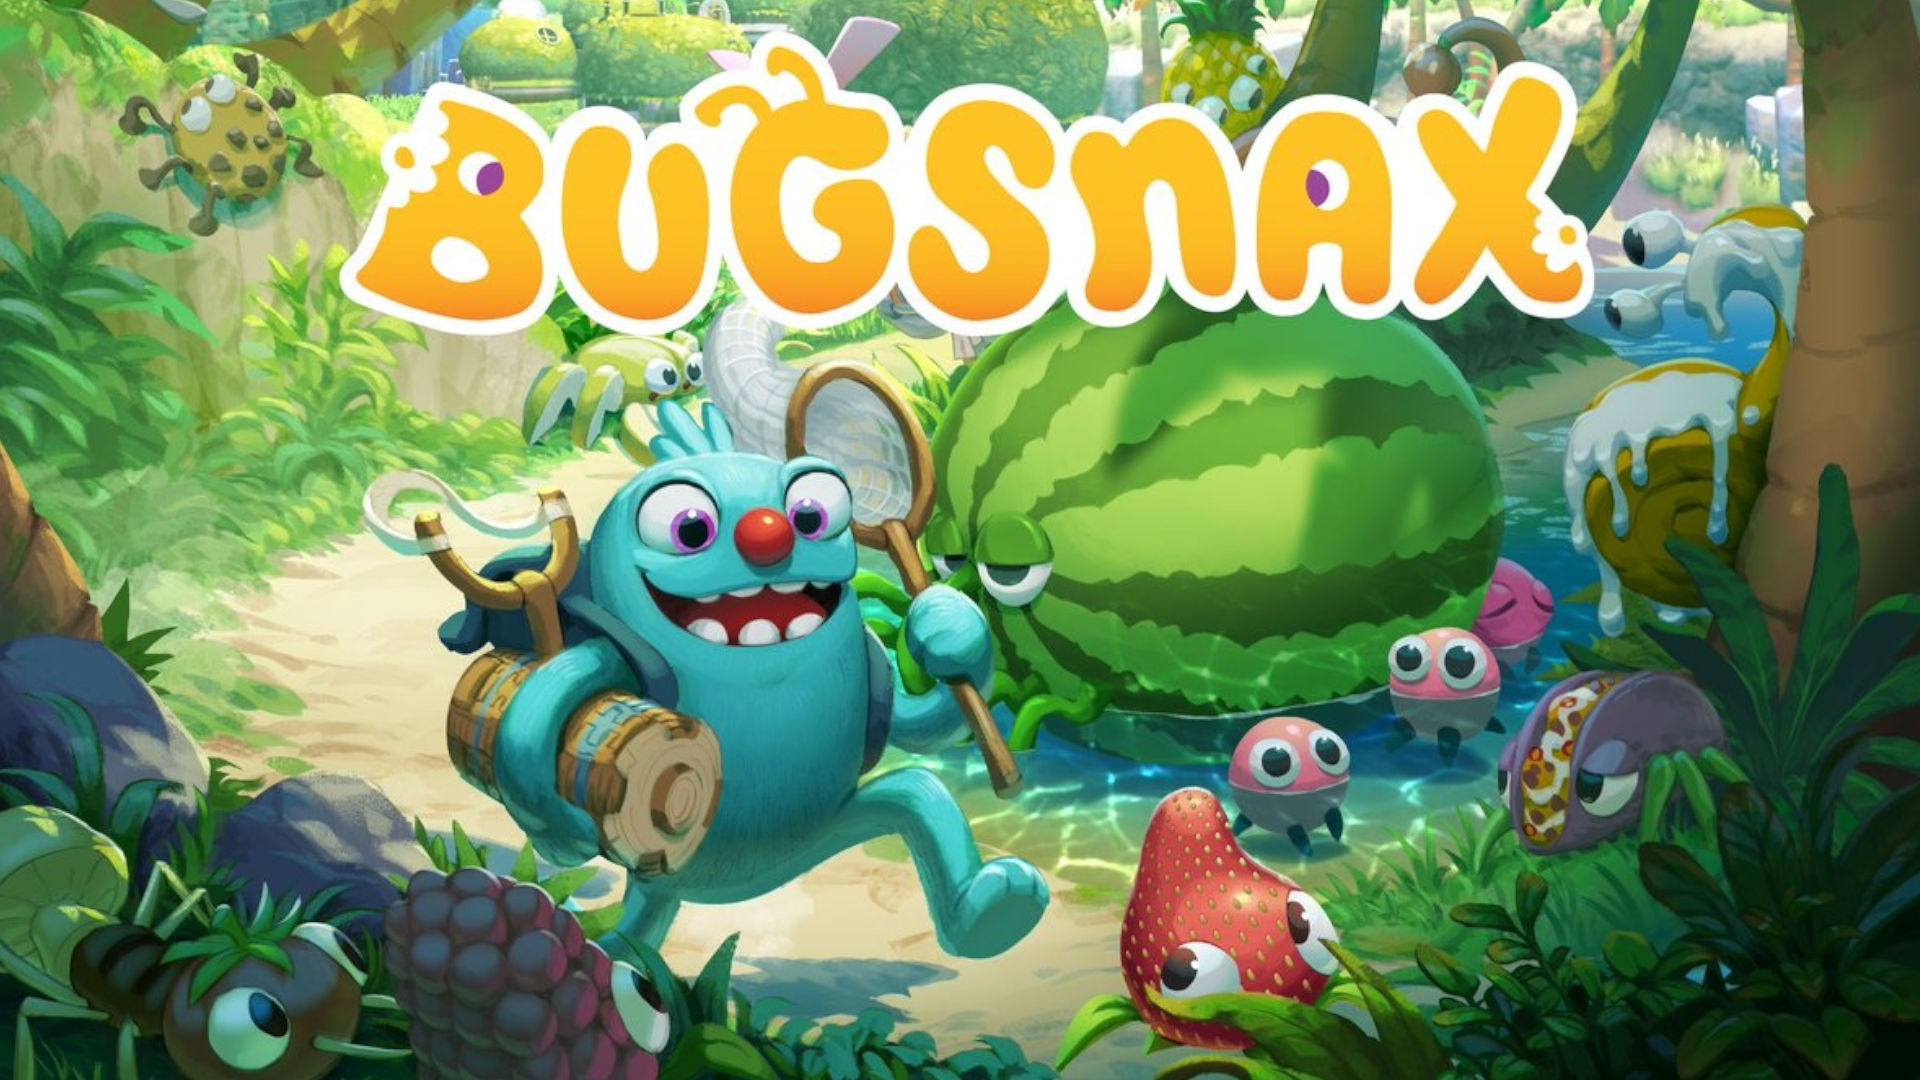 Cover art for Bugsnax, one of our boy games picks